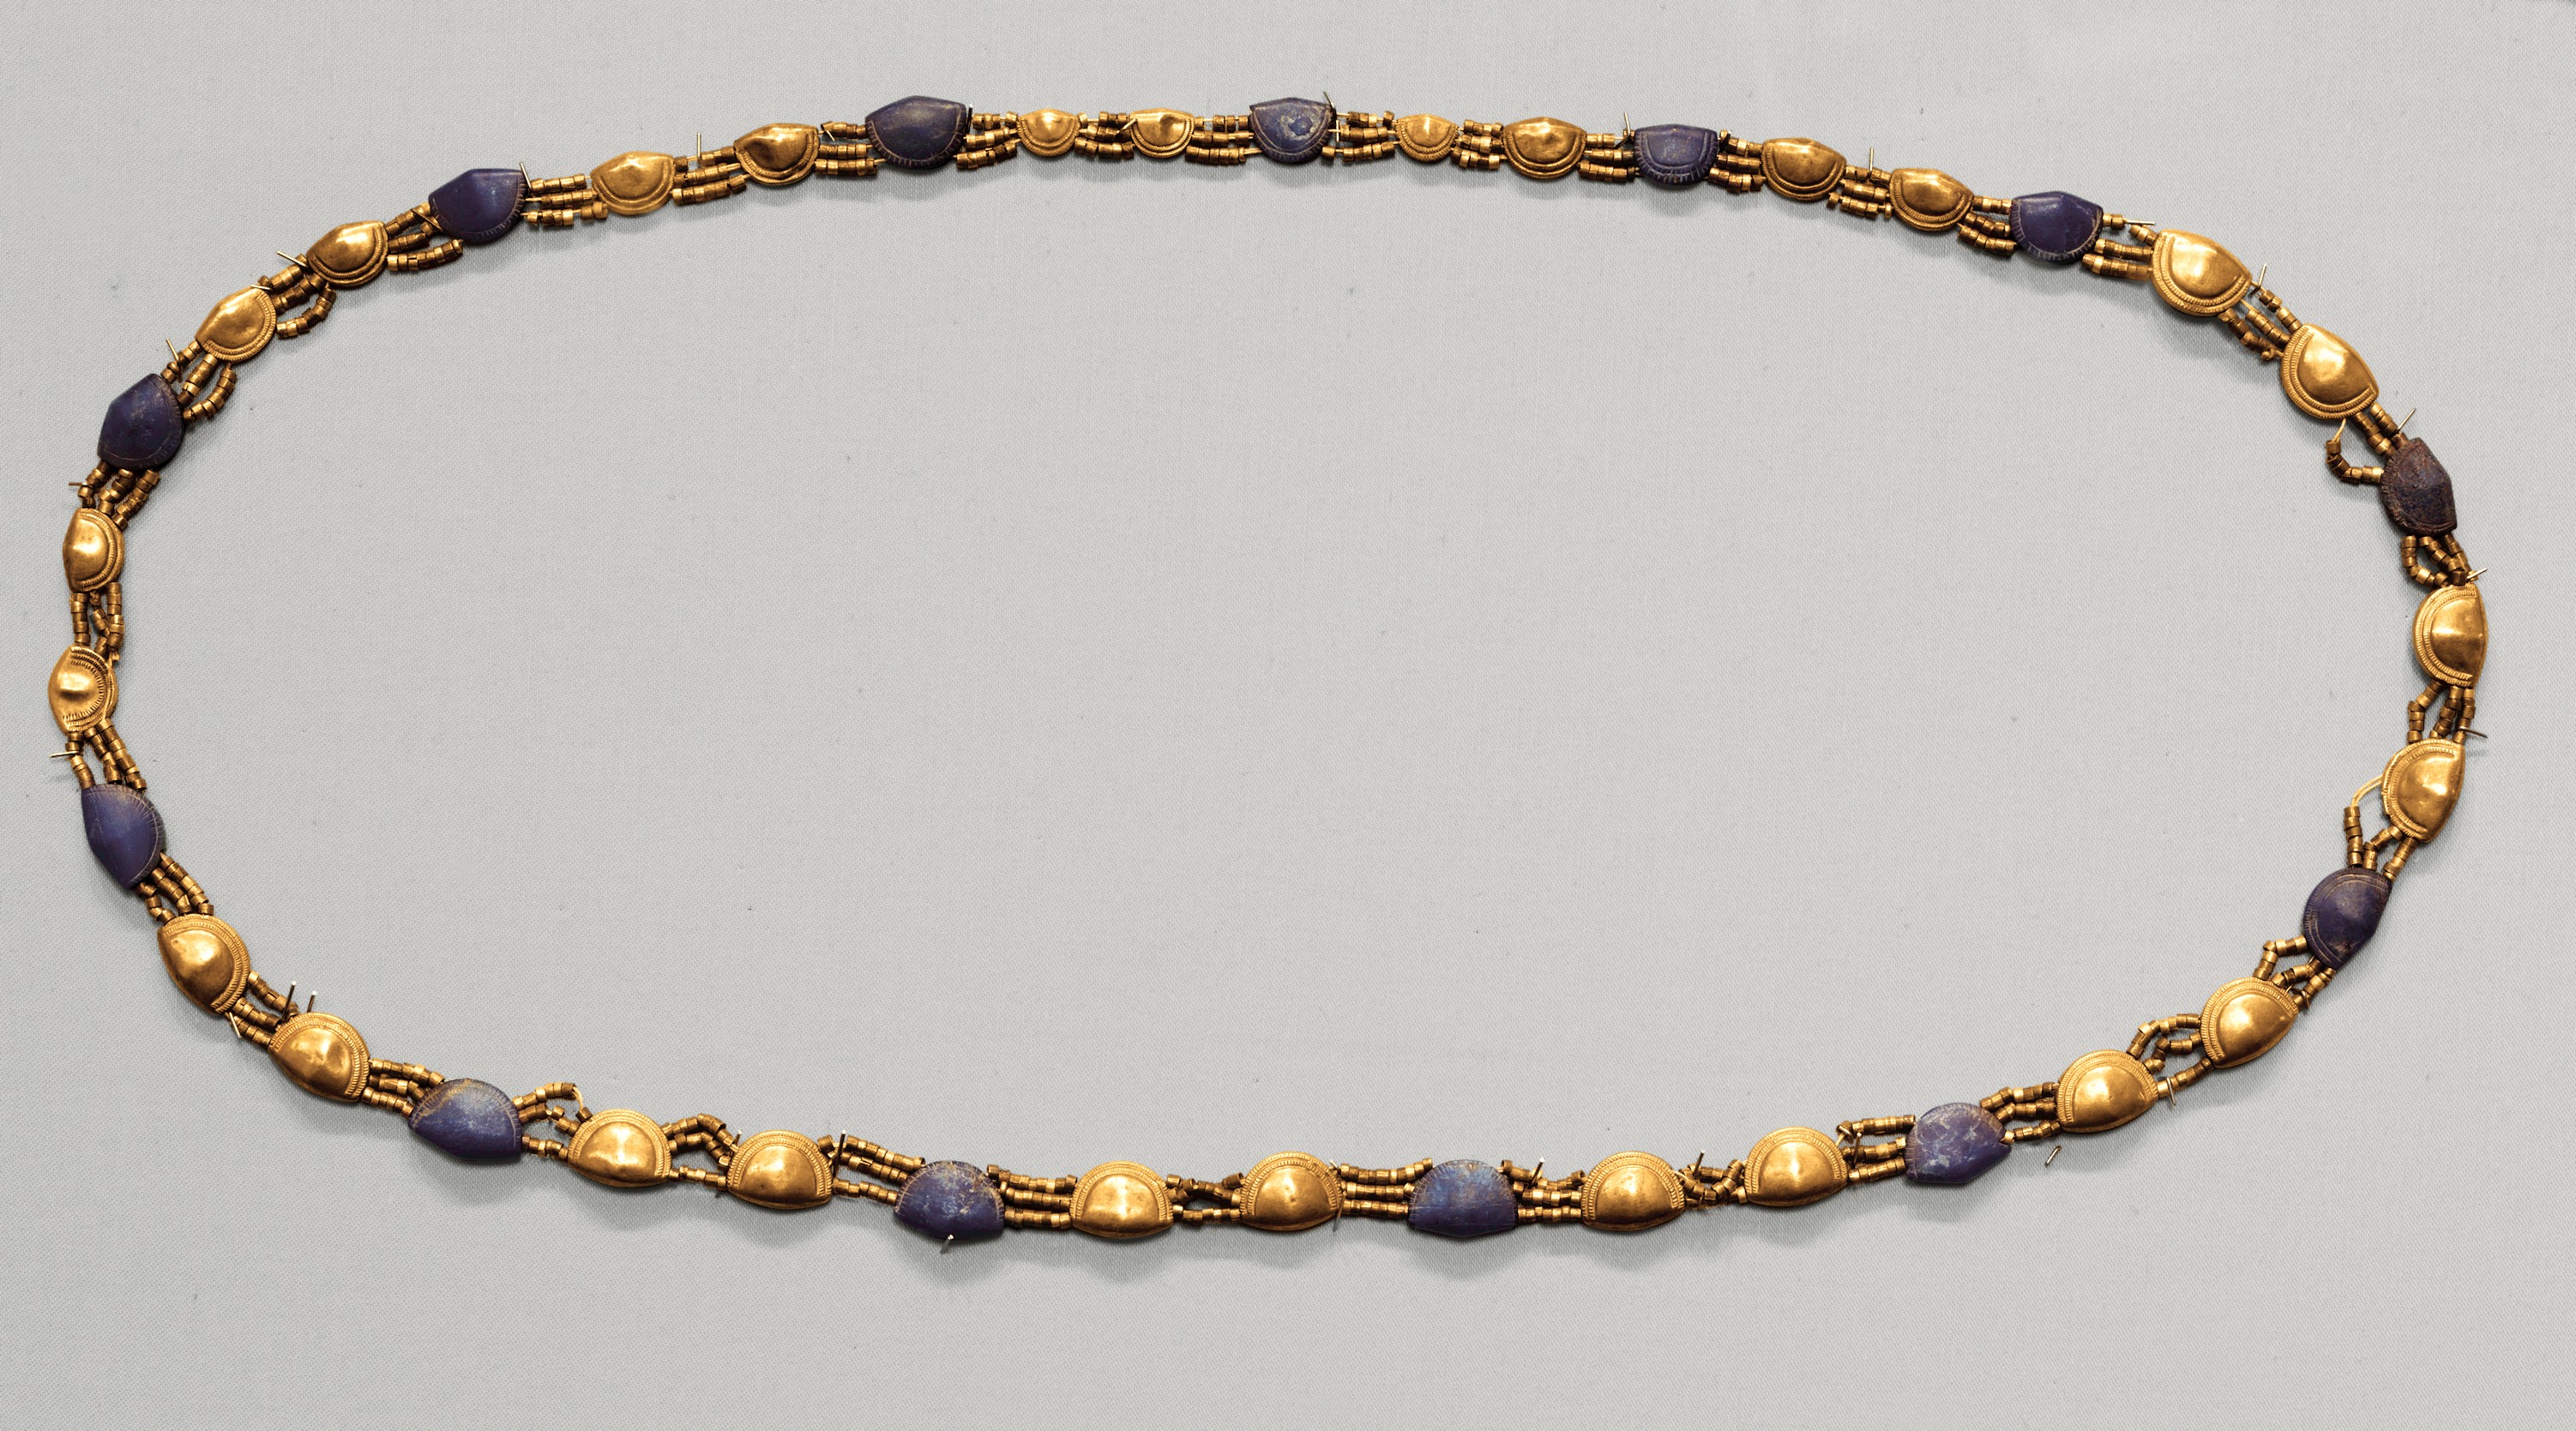 Girdle with gold and lapis wallet-shaped beads, New Kingdom